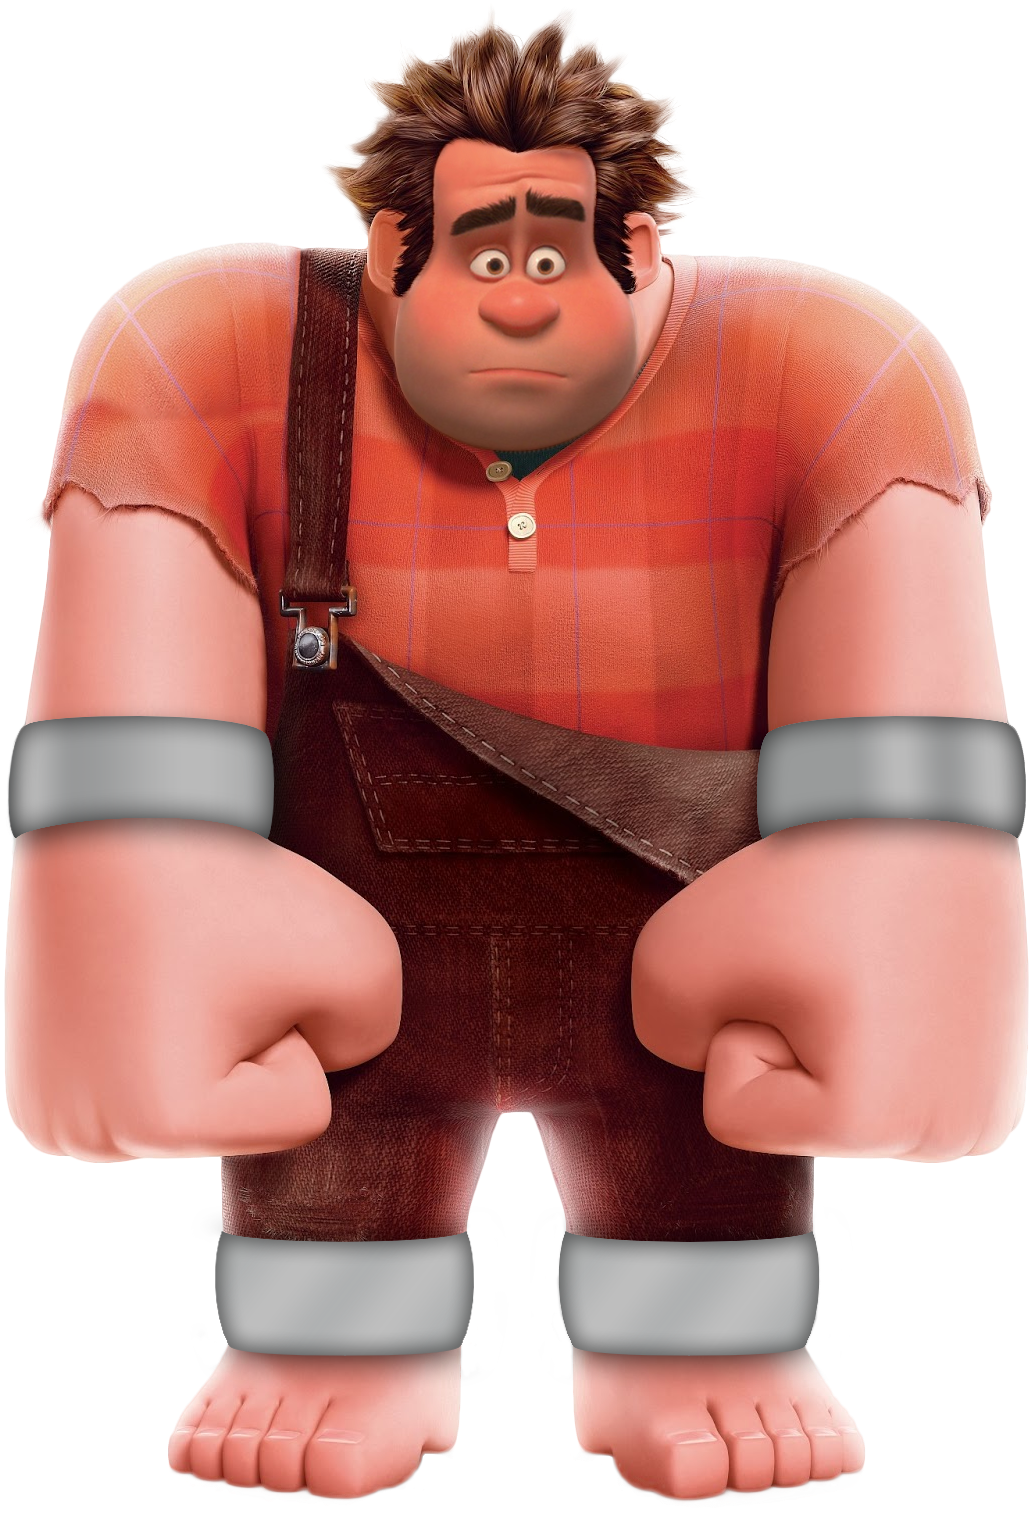 Chained Wreck It Ralph - Wreck It Ralph Png (1170x1600), Png Download